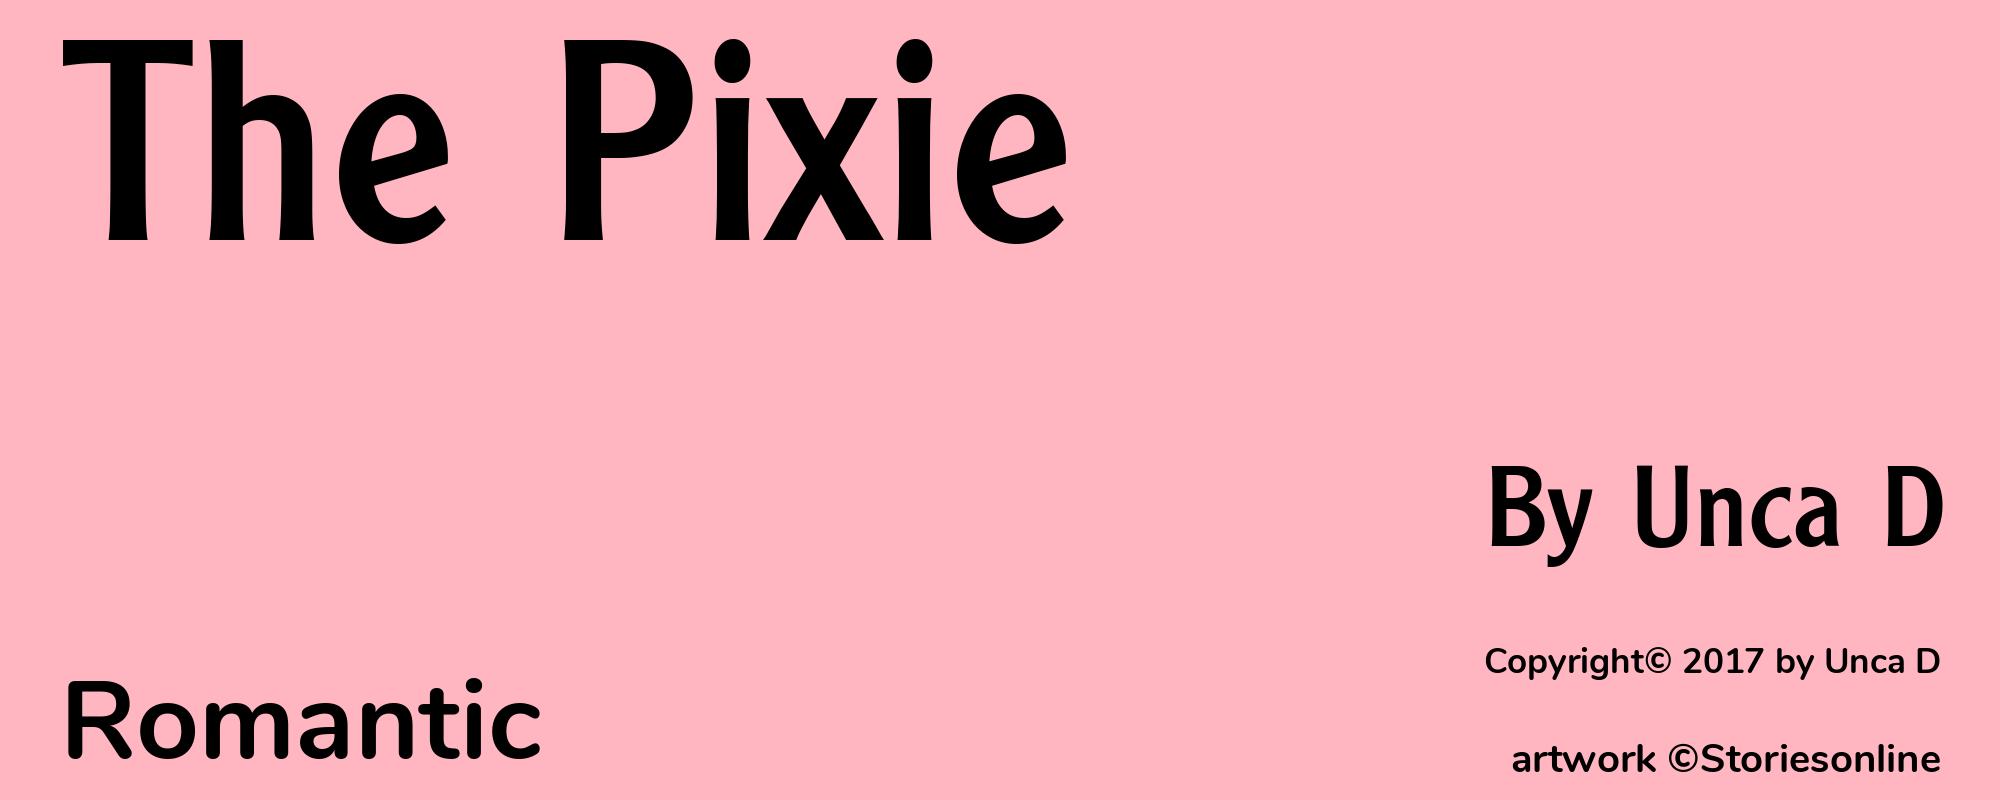 The Pixie - Cover